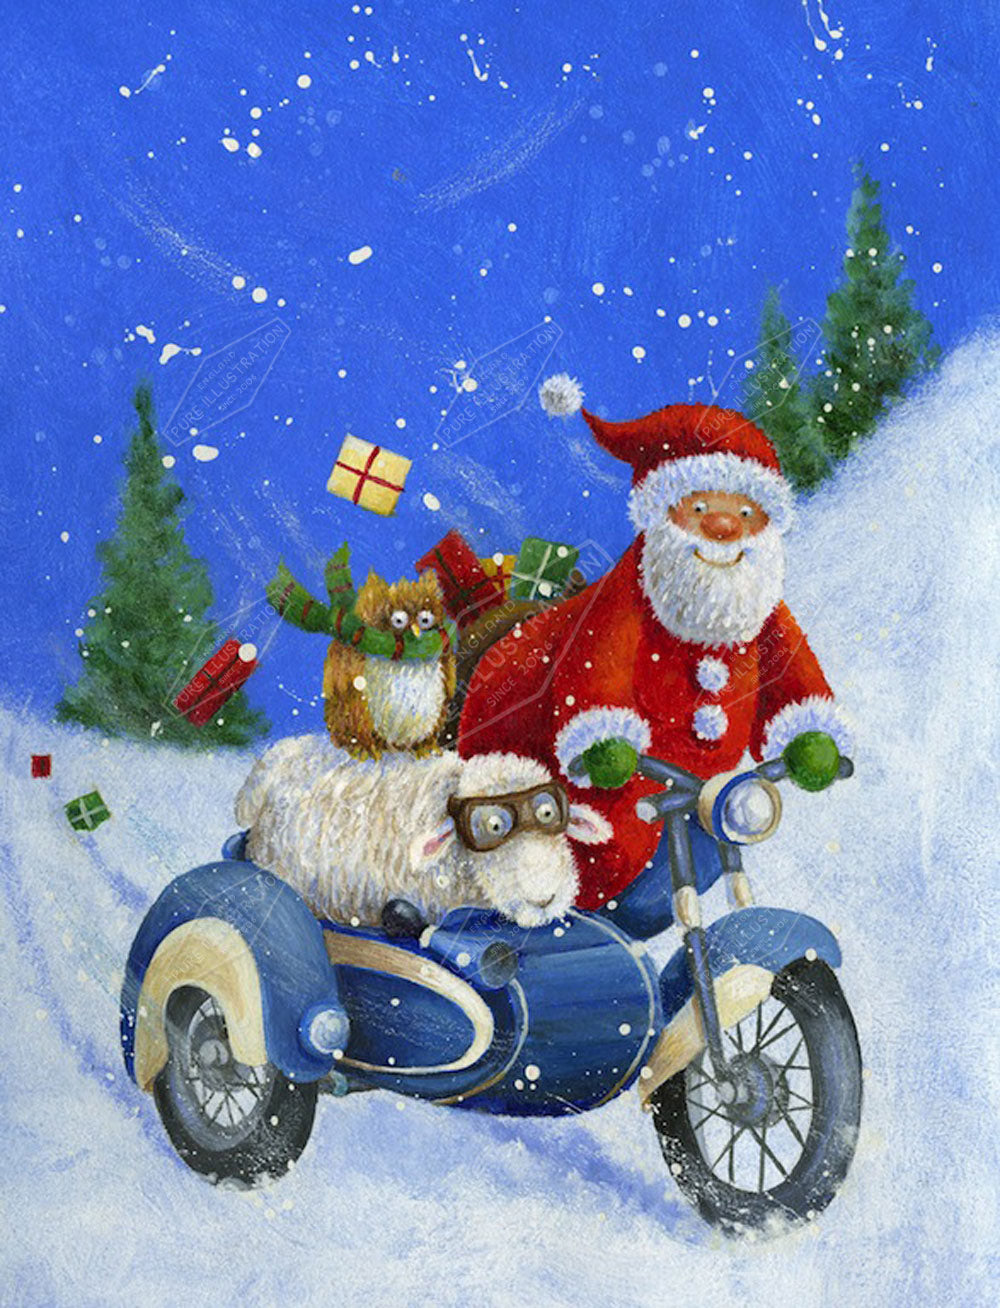 00019492JPA- Jan Pashley is represented by Pure Art Licensing Agency - Christmas Greeting Card Design